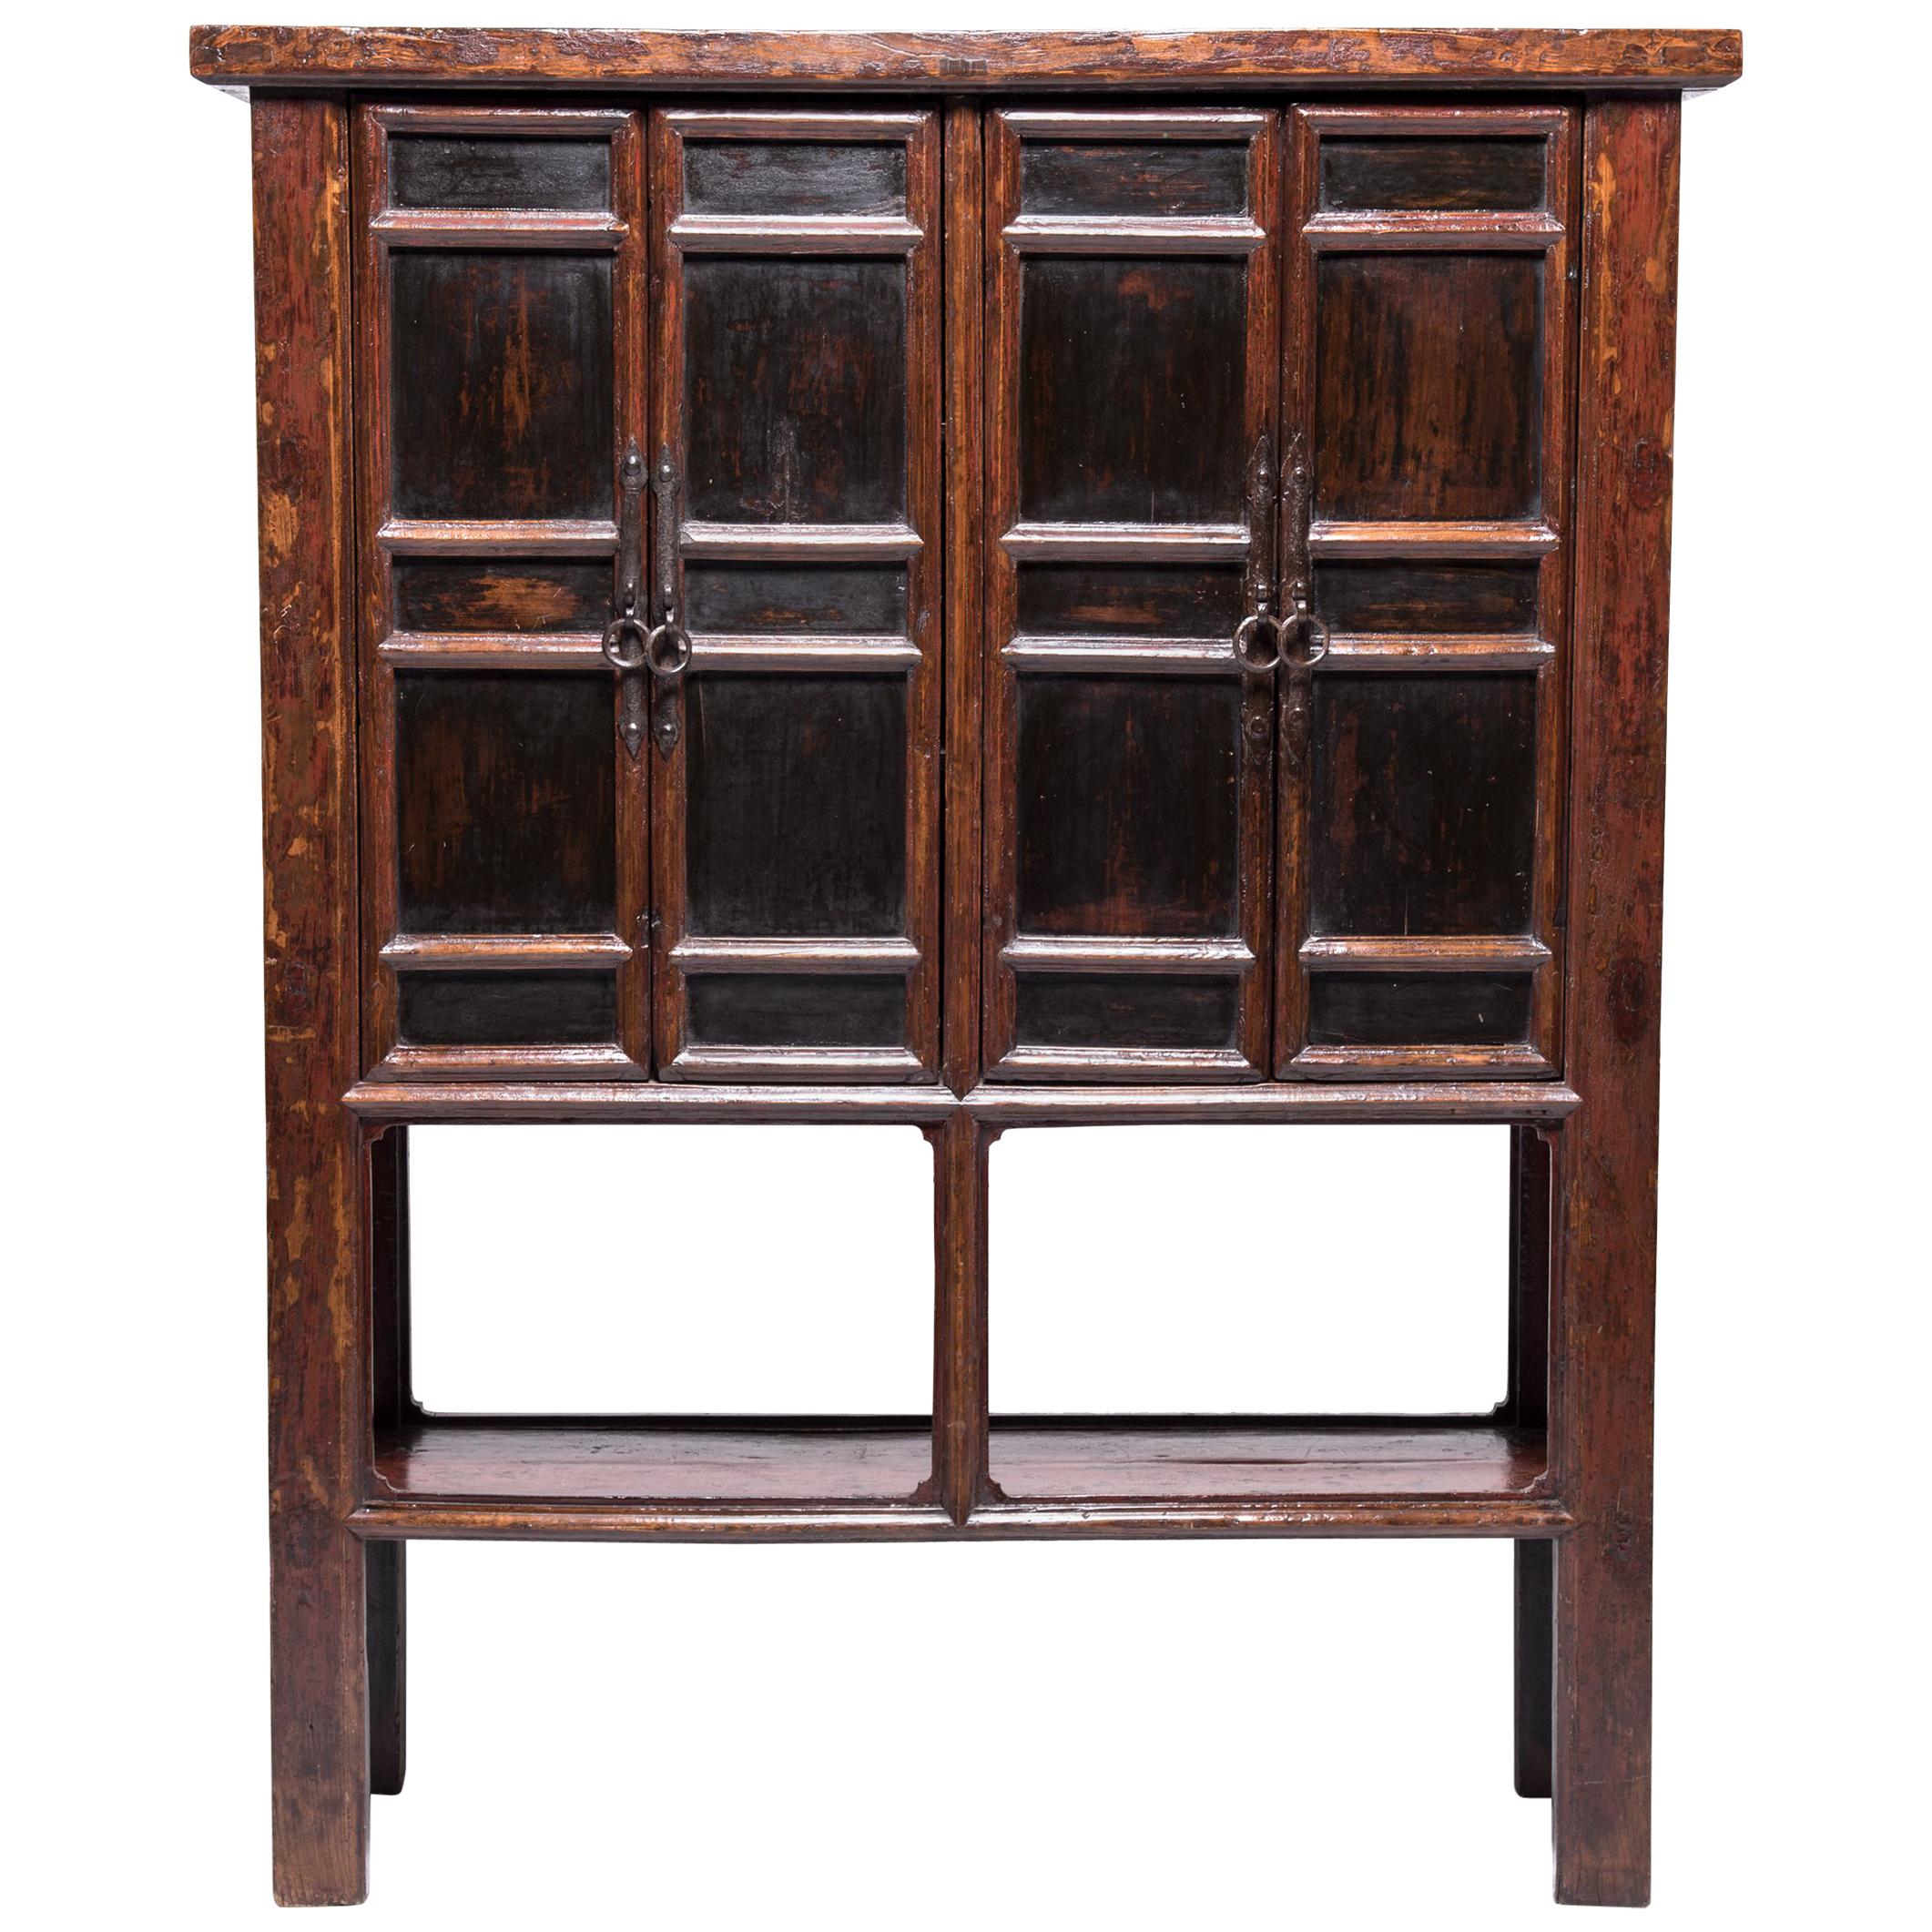 Provincial Chinese Cabinet with Open Shelf, c. 1850